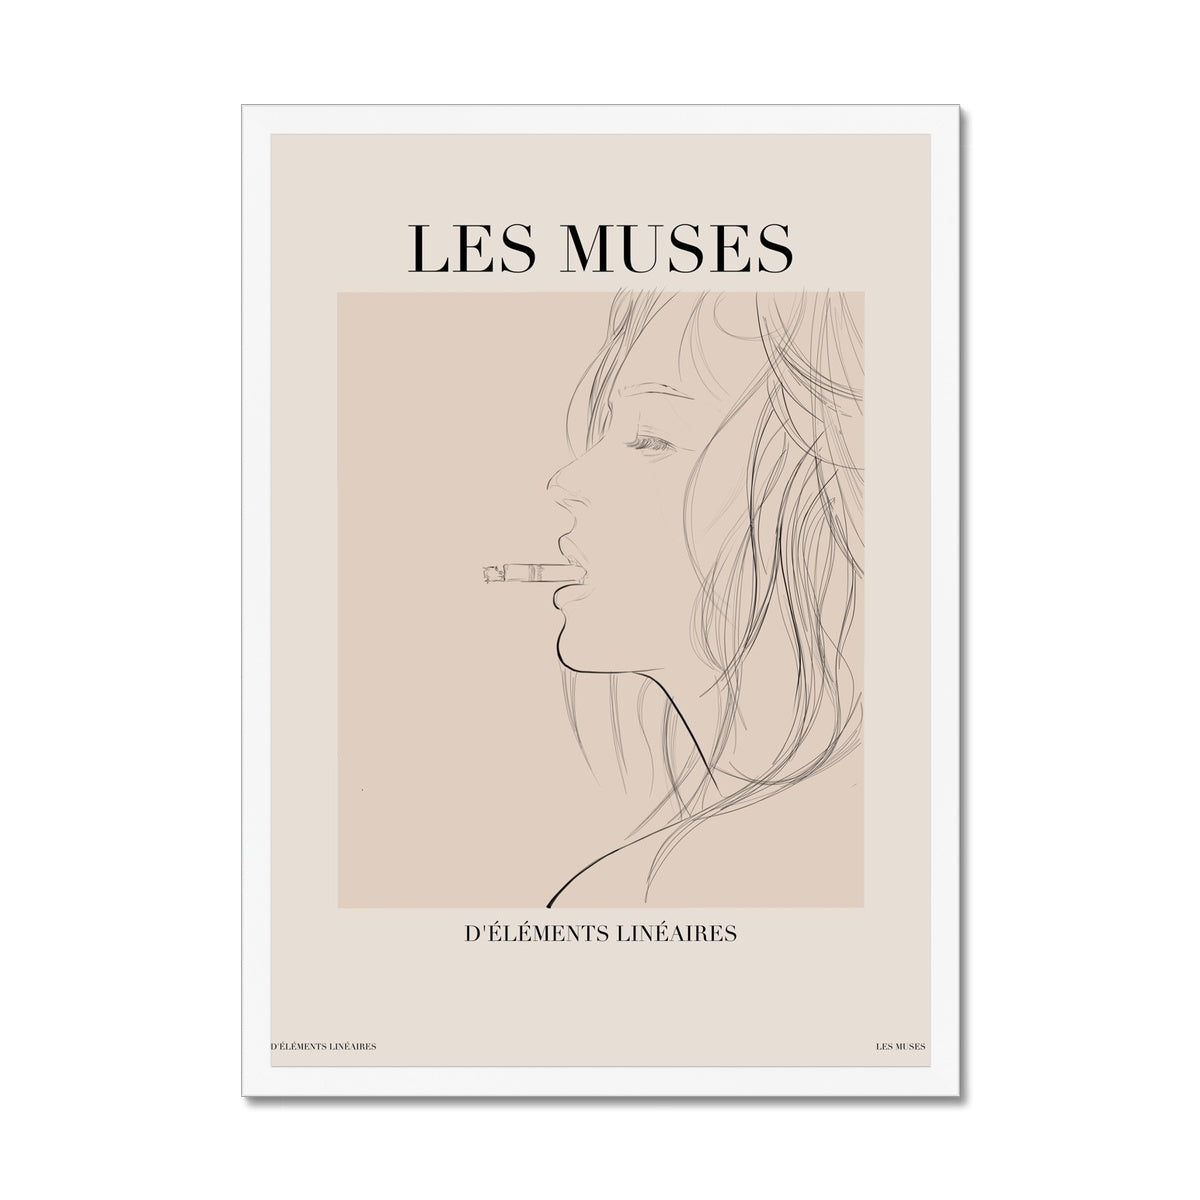 Les Muses is a dreamy wall art collection of line art drawings and paintings.
Select among illustrations of greek goddesses, seashells, cherubs and muses. 